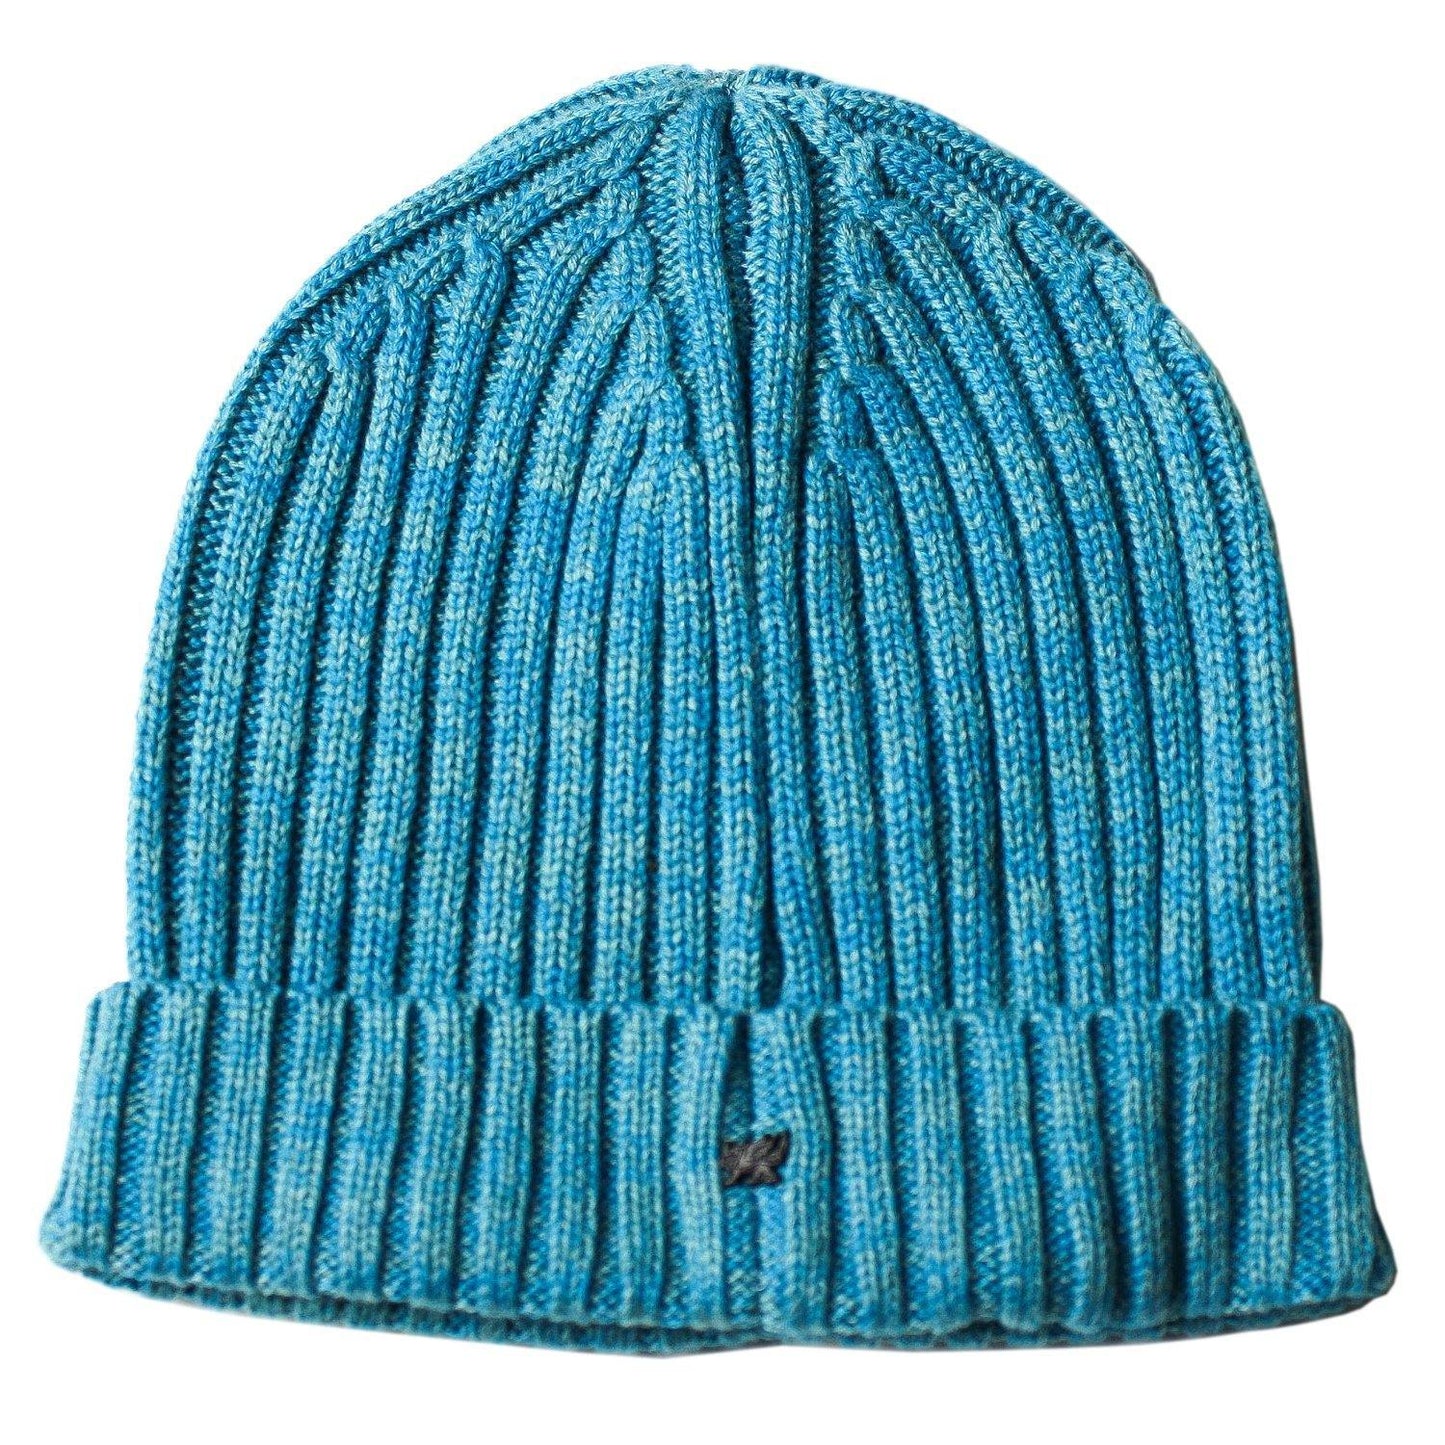 Bob Beanie in Teal - Lords Of Harlech